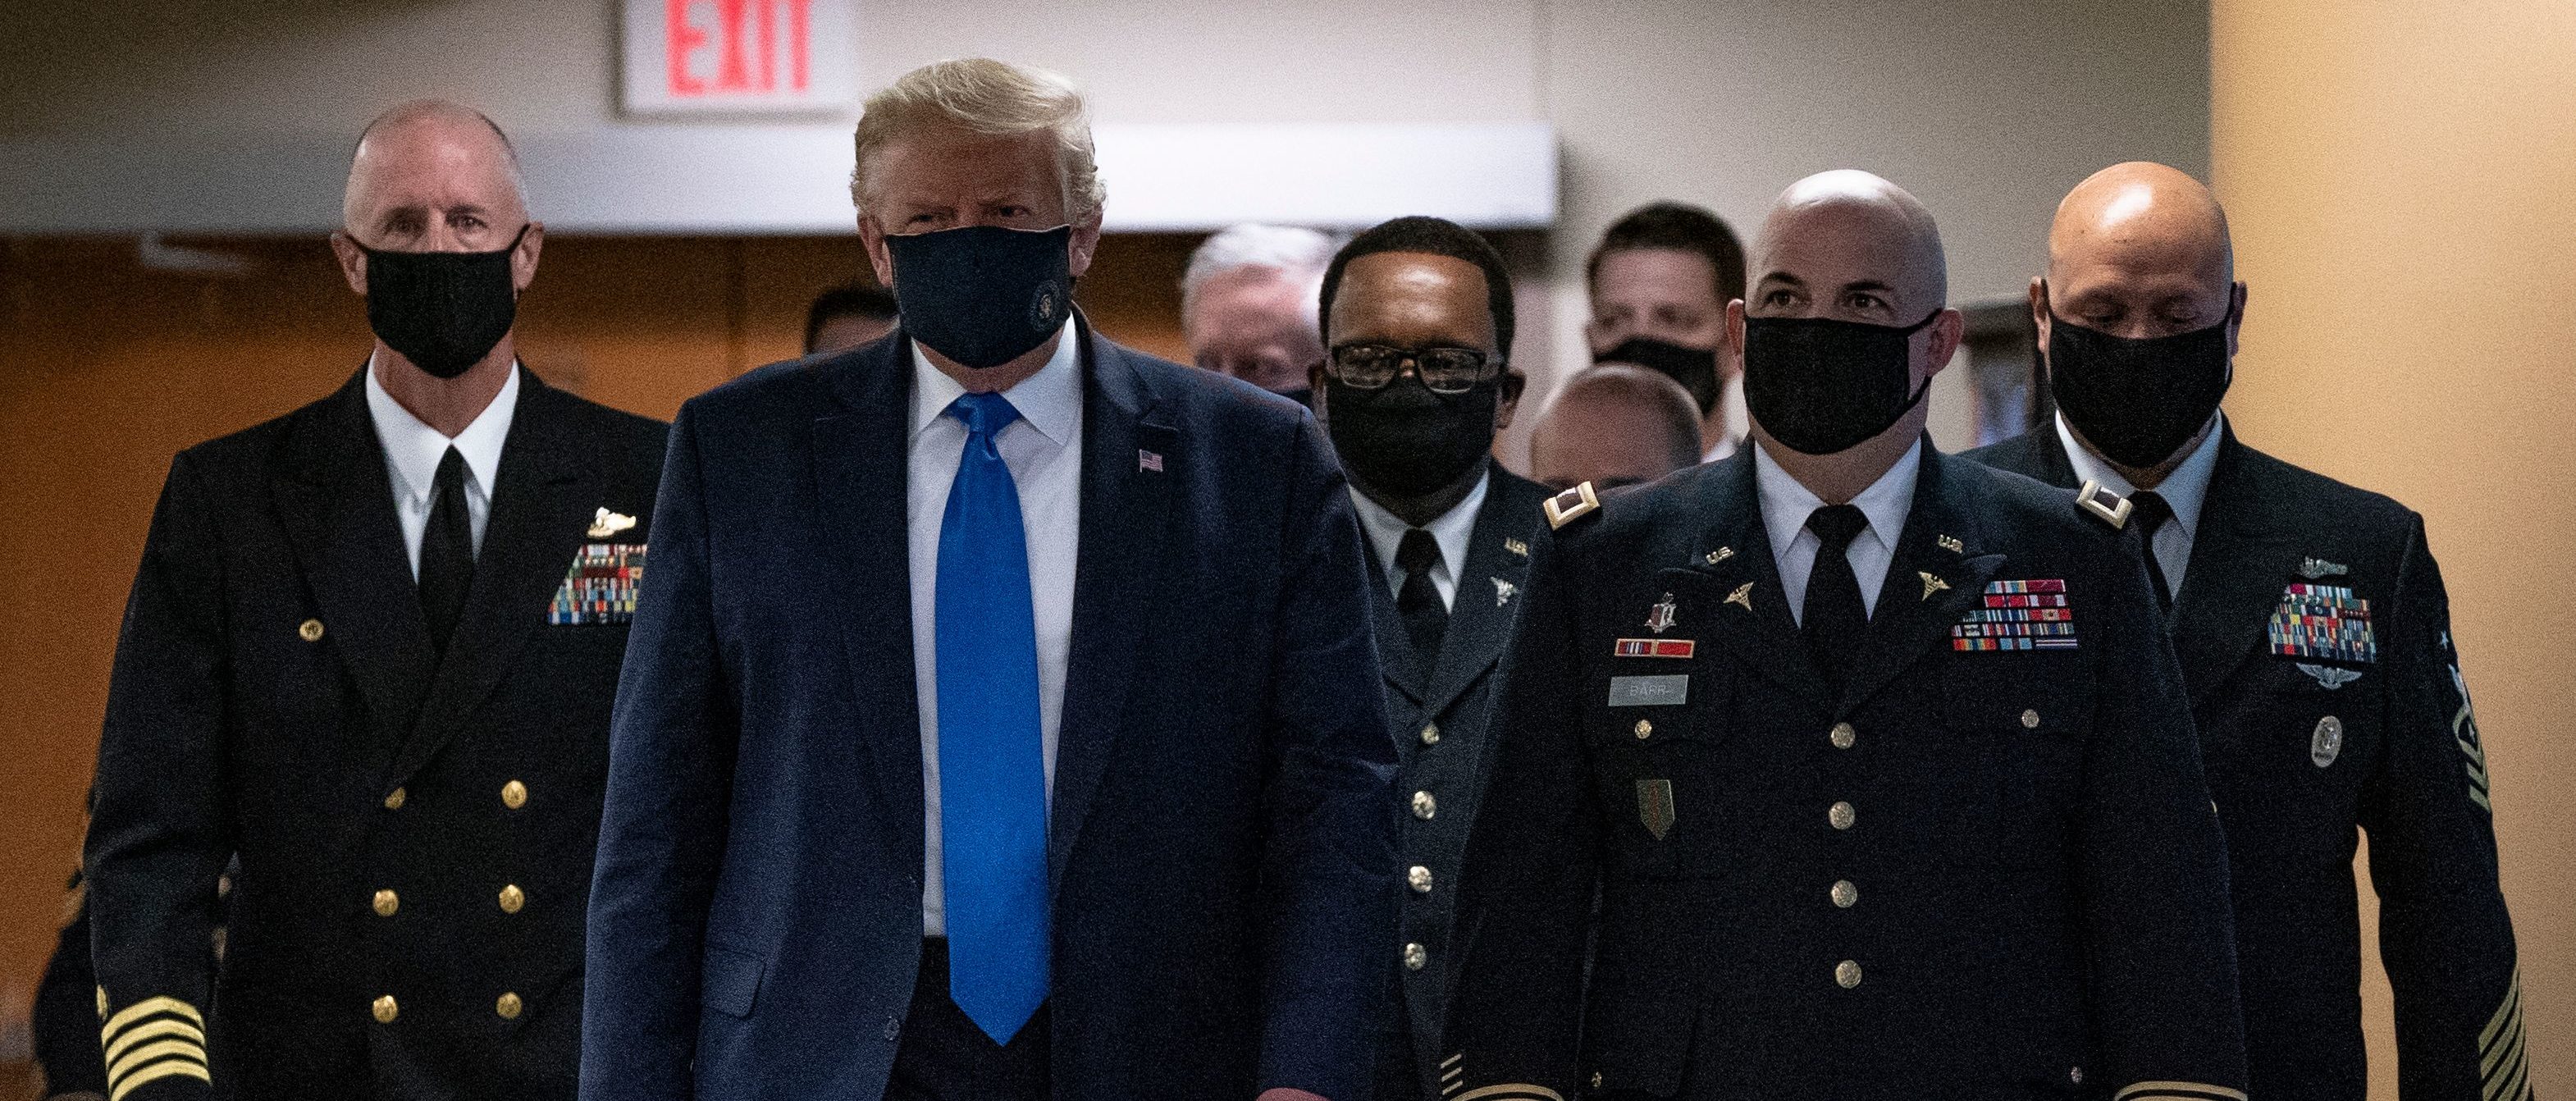 US President Donald Trump wears a mask as he visits Walter Reed National Military Medical Center in Bethesda, Maryland on July 11, 2020. (Photo by ALEX EDELMAN / AFP) (Photo by ALEX EDELMAN/AFP via Getty Images)